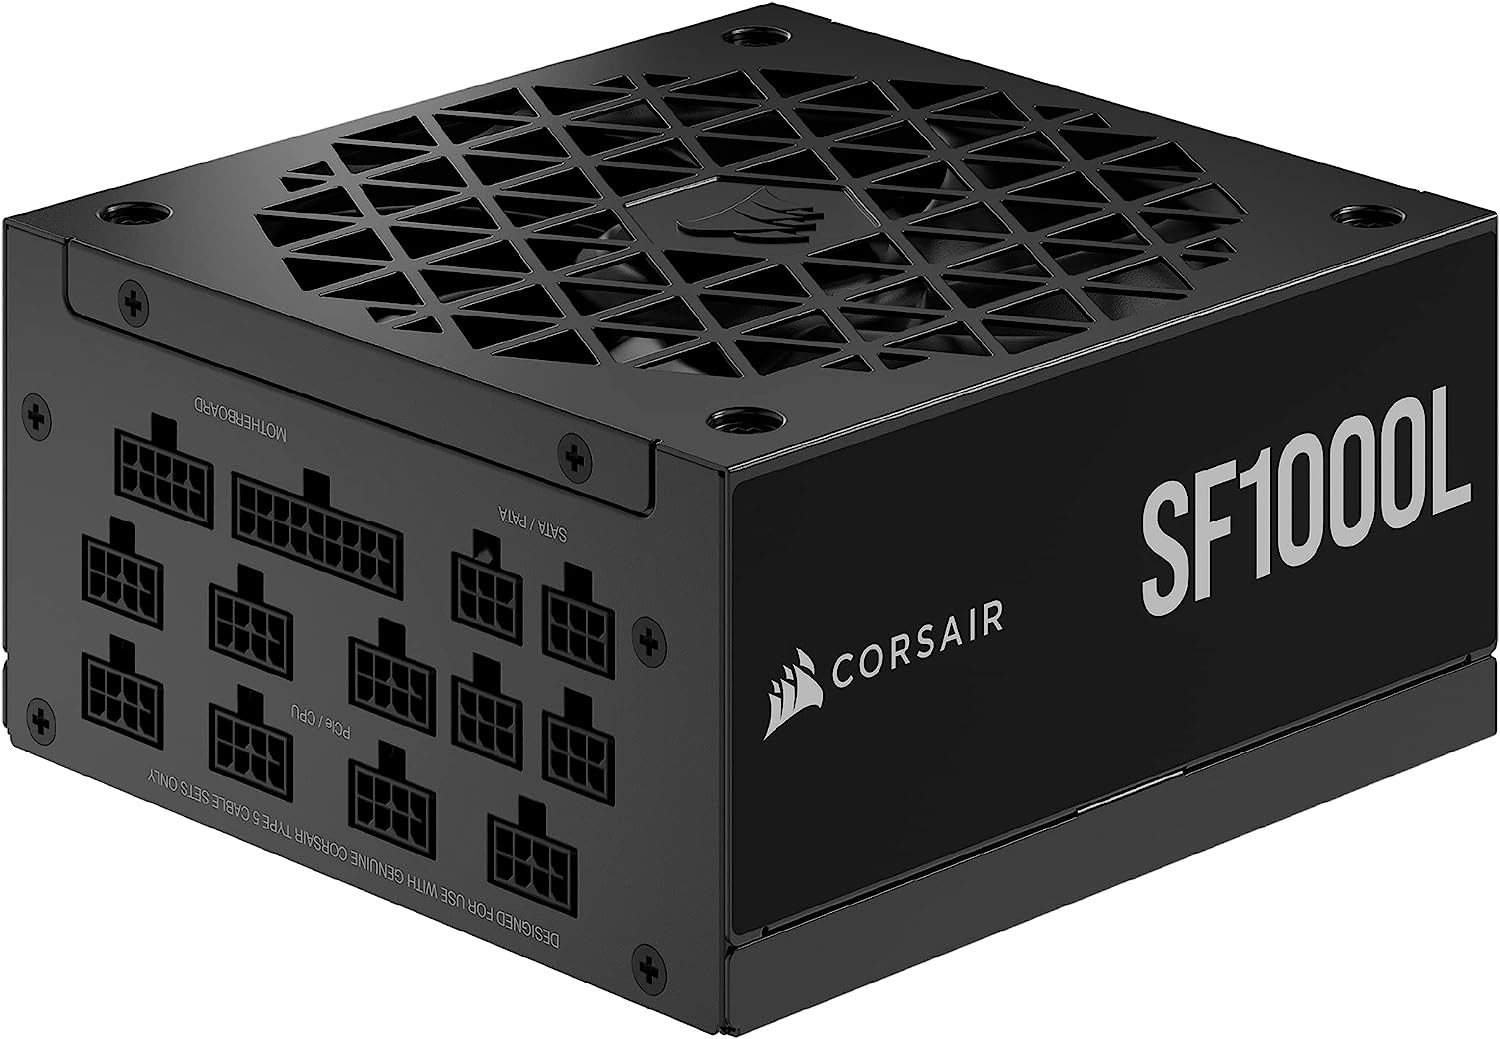 Corsair 1000W Fully Modular SFX Power Supply - $129.99 - Free shipping for Prime members - $129.99 Woot